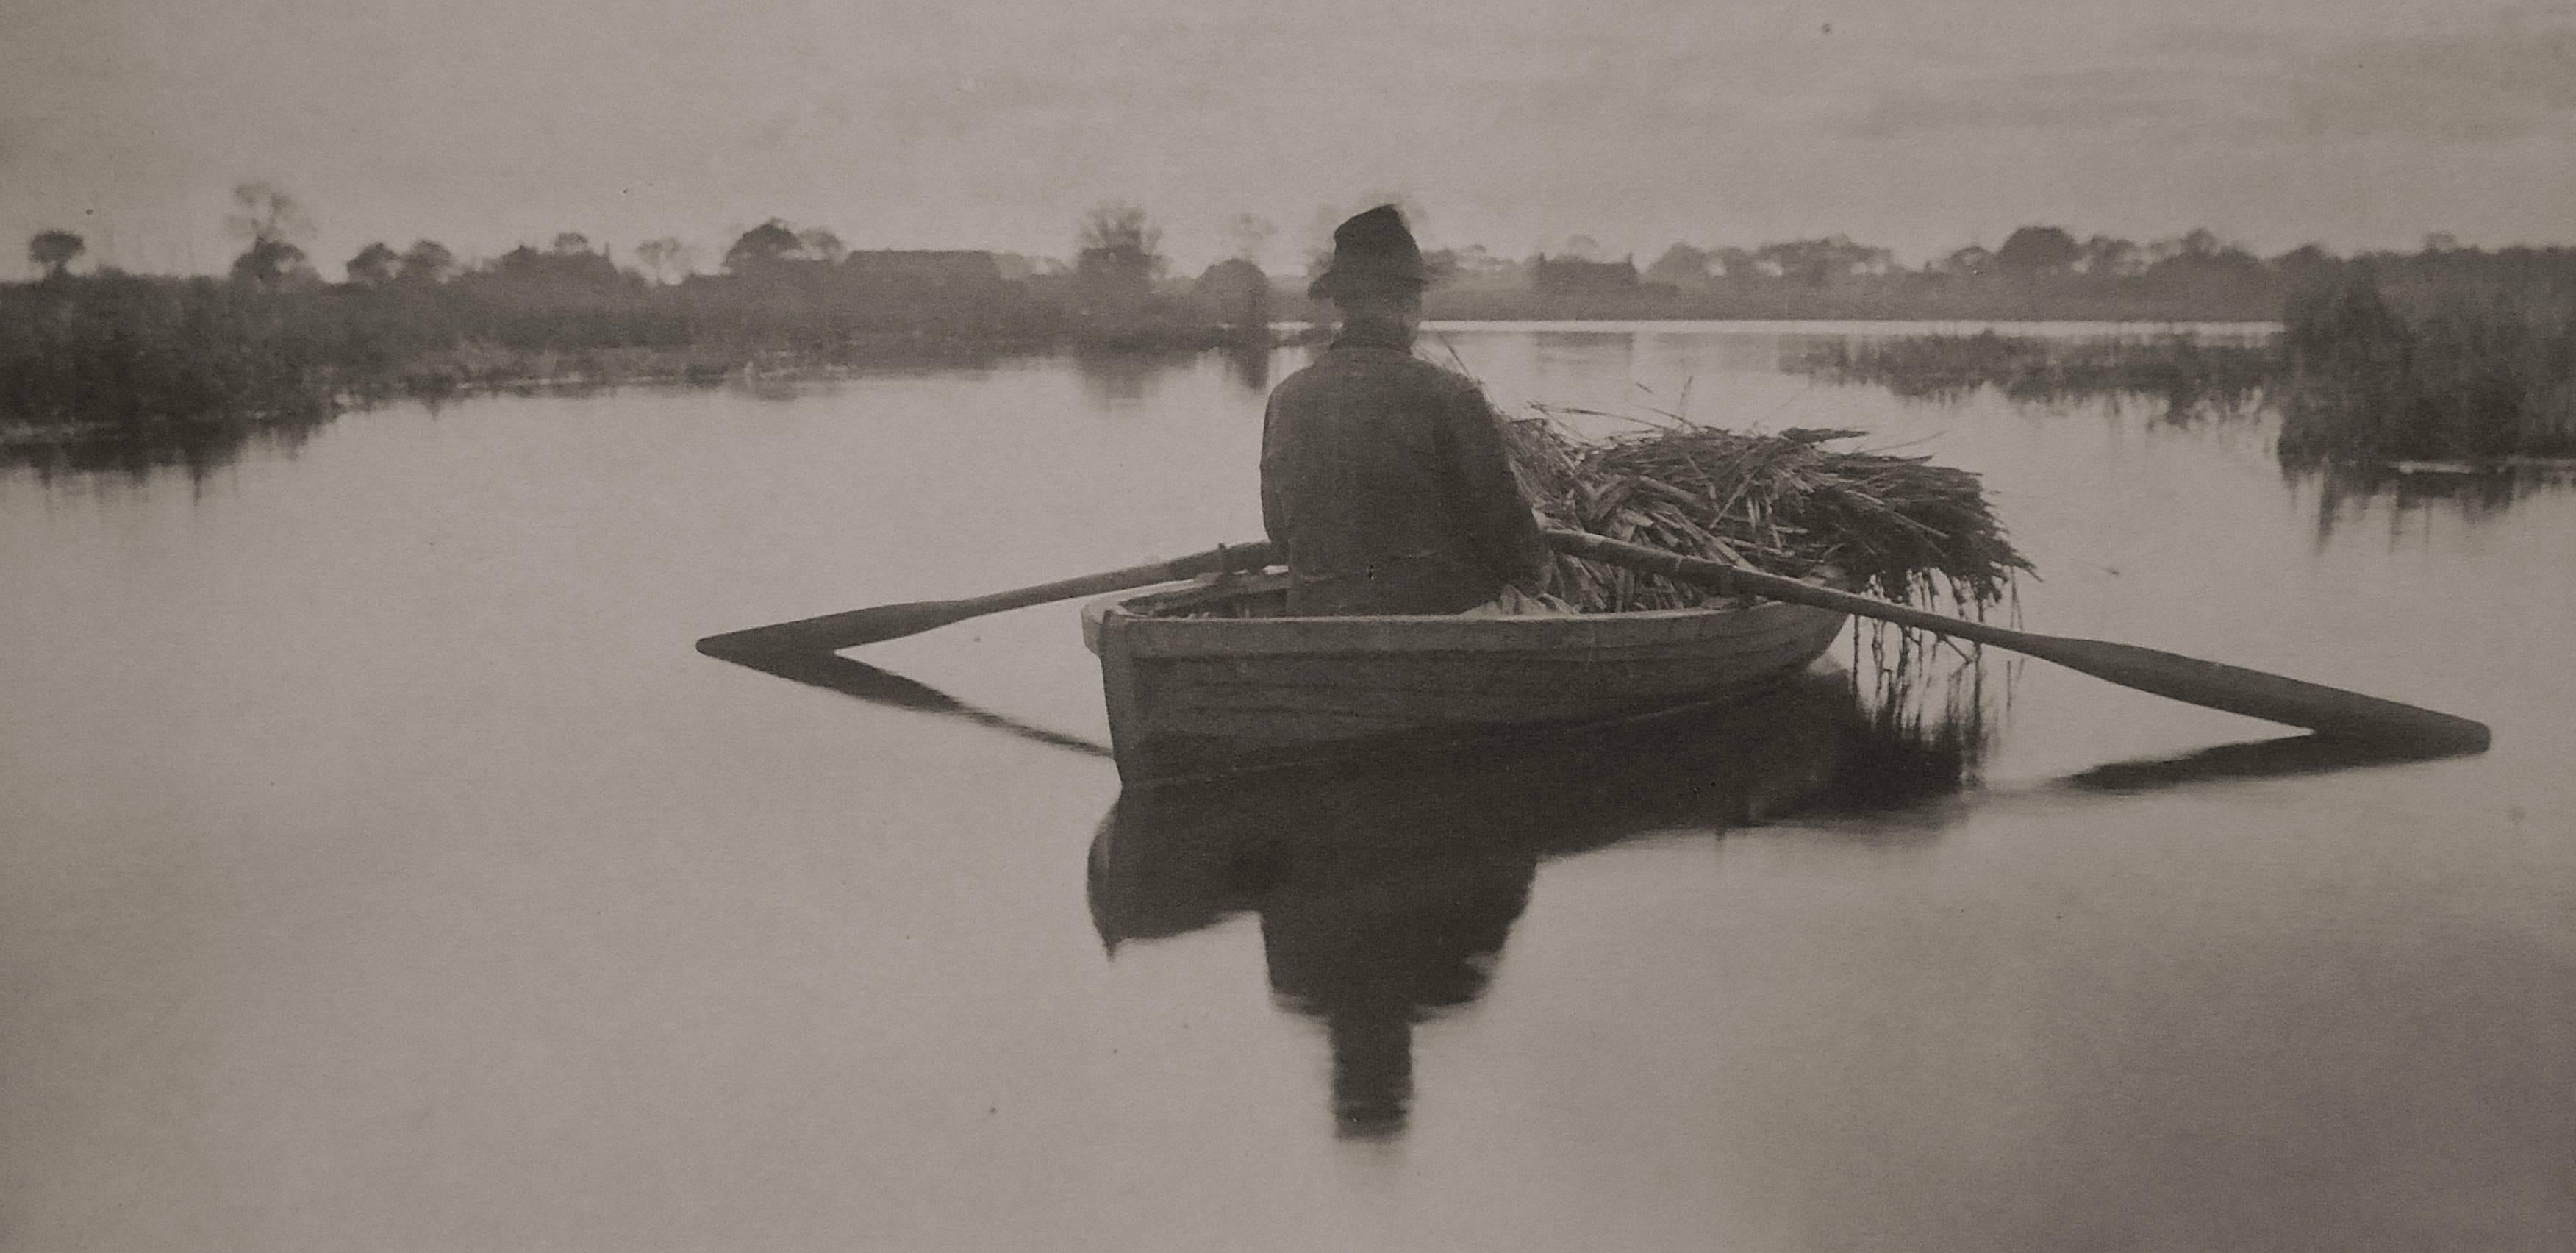 Rowing Home the Schoof-Stuff, Life and Landscape on the Norfolk Broads - Photograph by P.H. Emerson